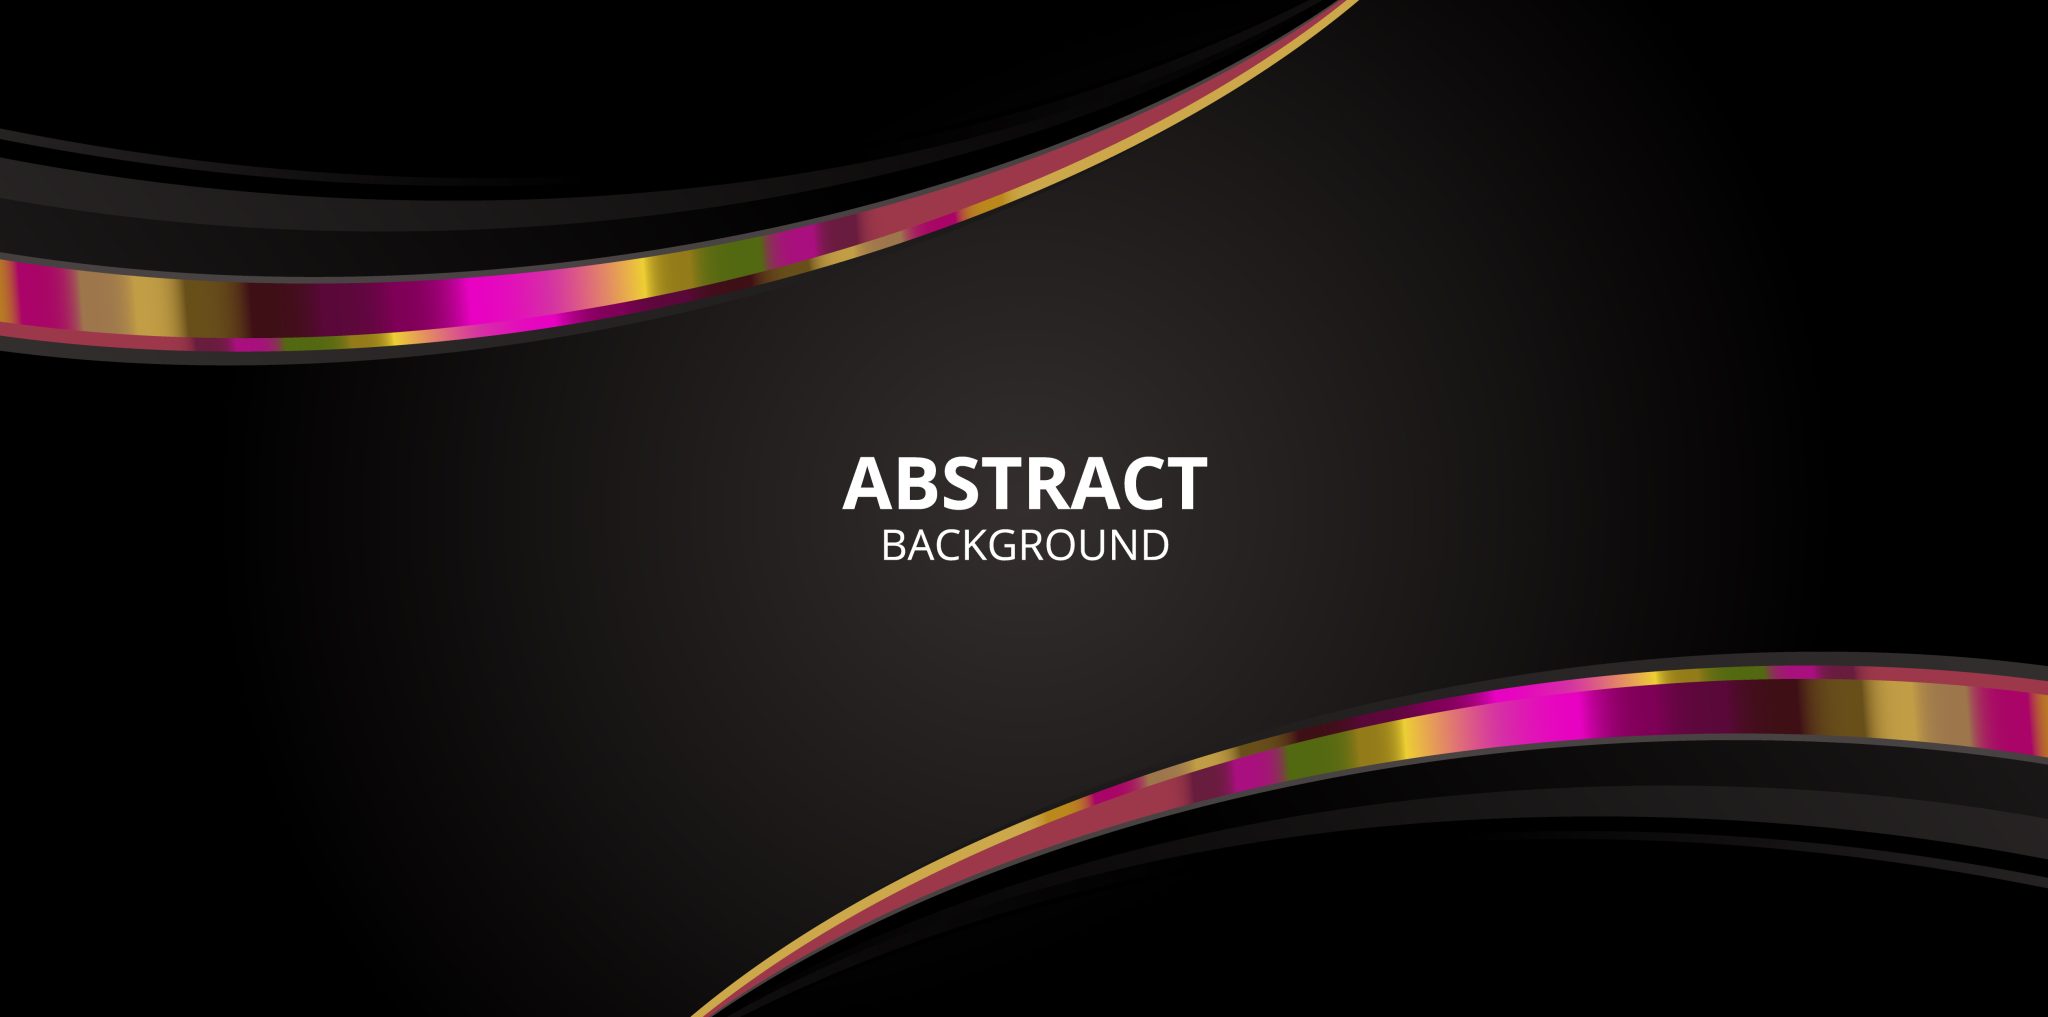 Abstract Black Colorful Background Design GraphicsFamily